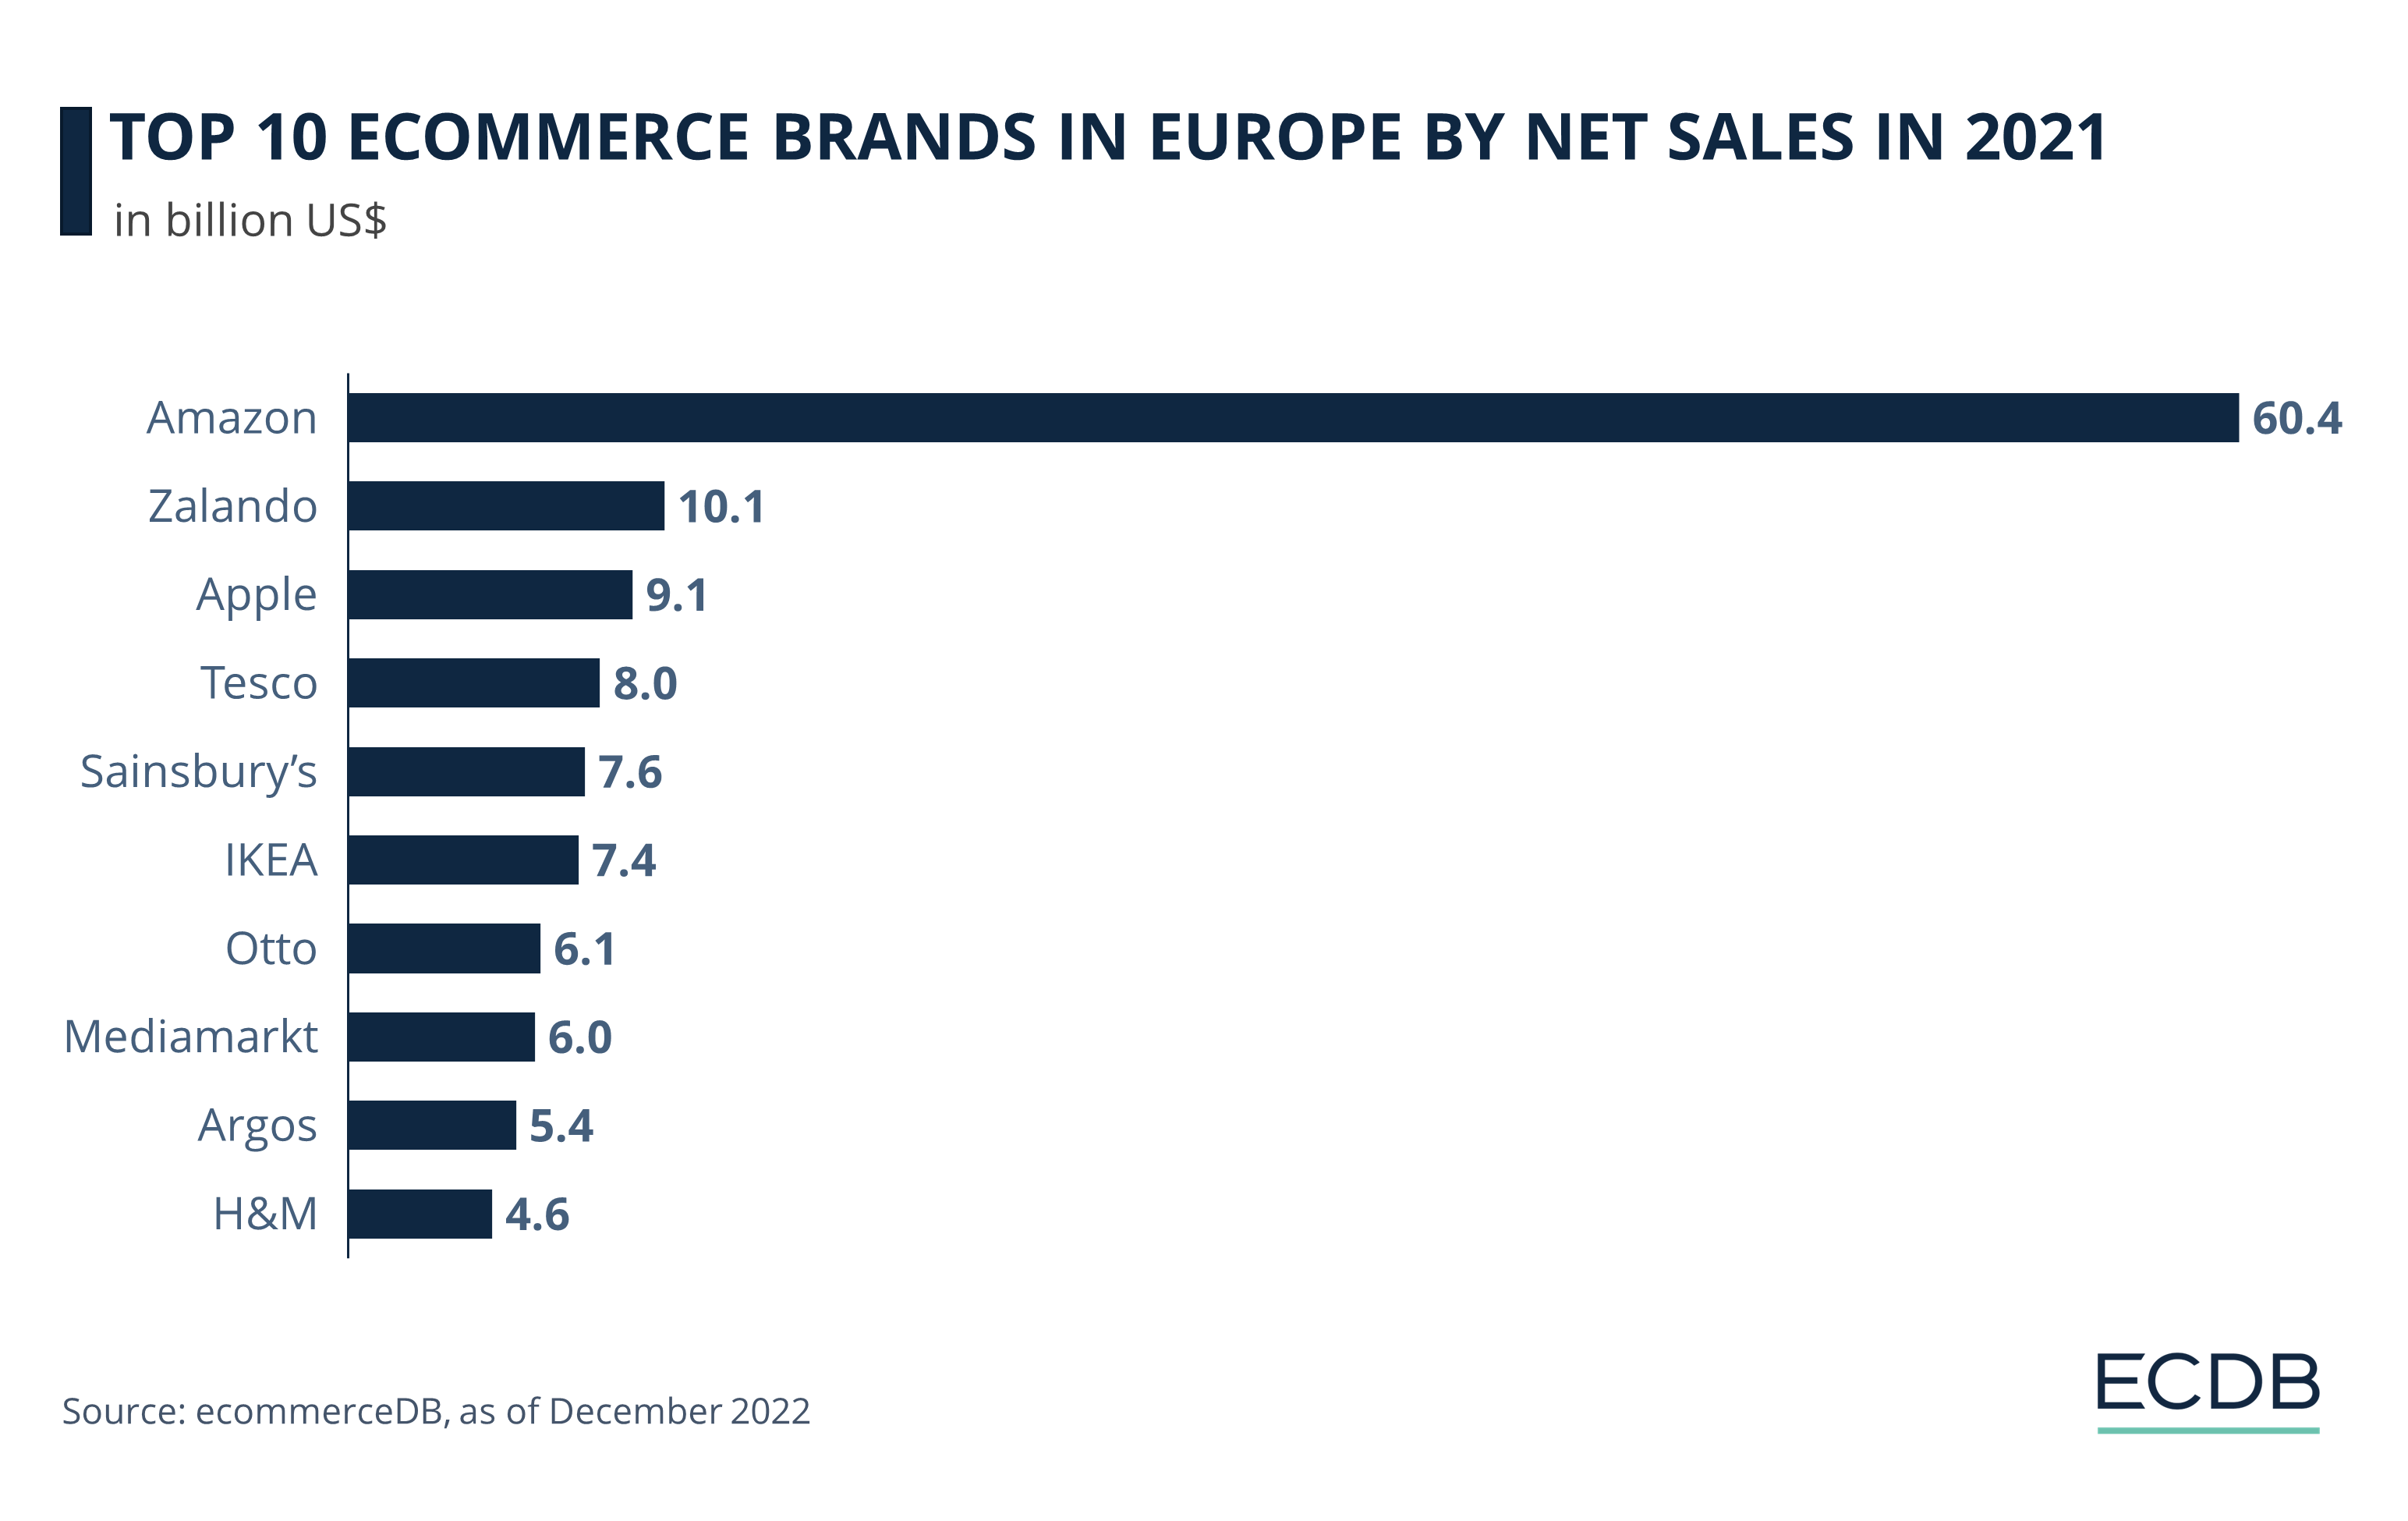 Top 10 eCommerce Brands in Europe by Net Sales in 2021